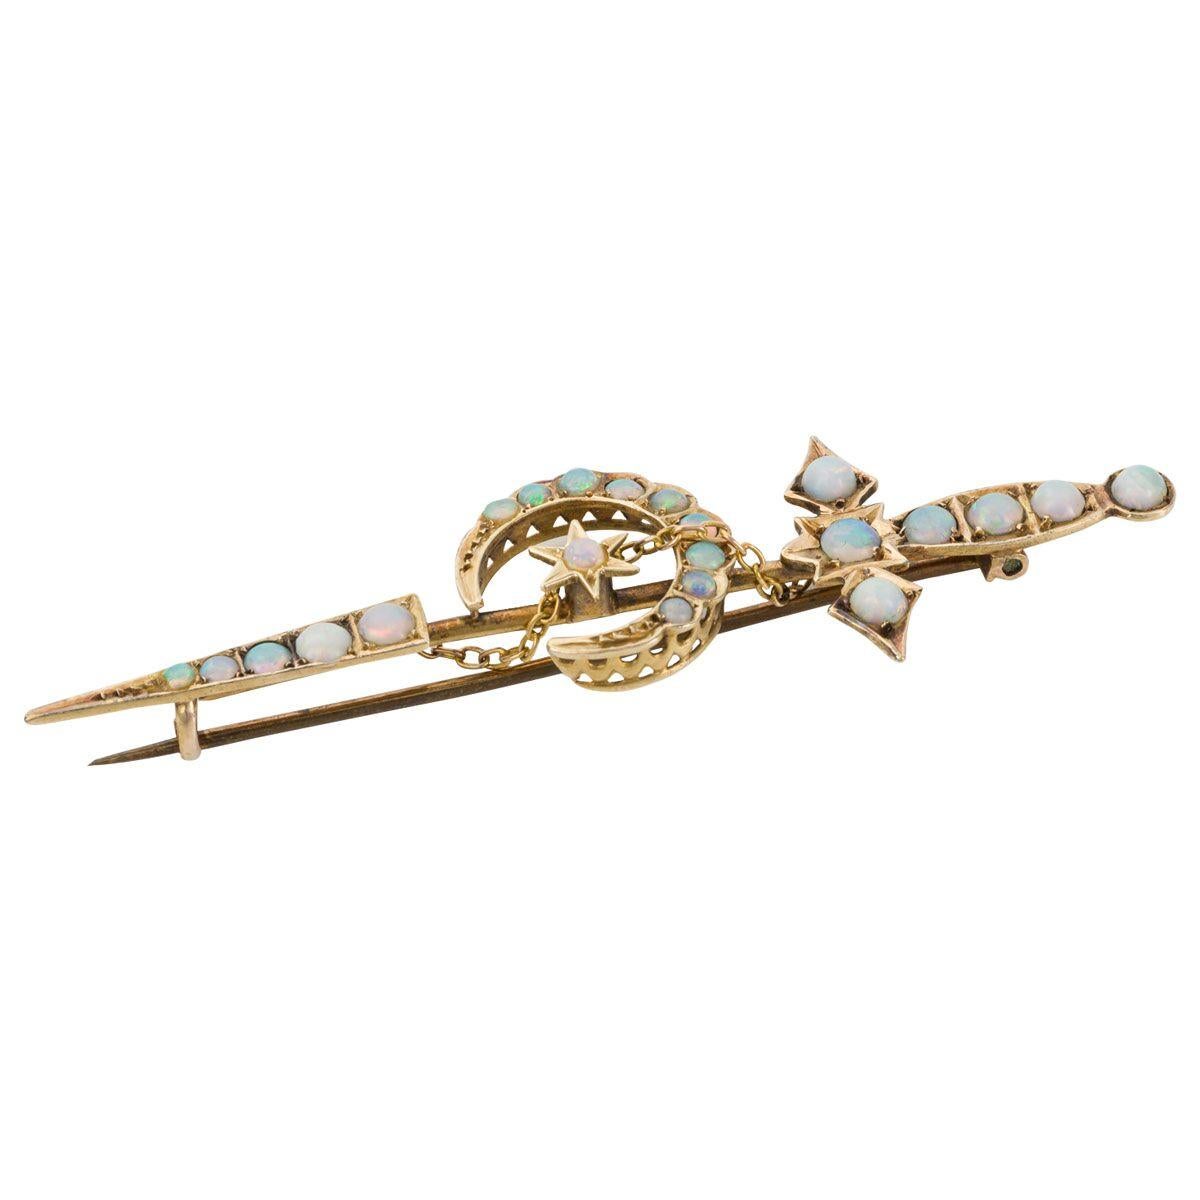 A little piece of Australian jewellery history with this lovely Willis & Sons sword pin, set with pretty cabochon cut opals. There are 22 bright and lively opals that show lots of rainbow colours from pinks, to greens, to reds. The pin is crafted